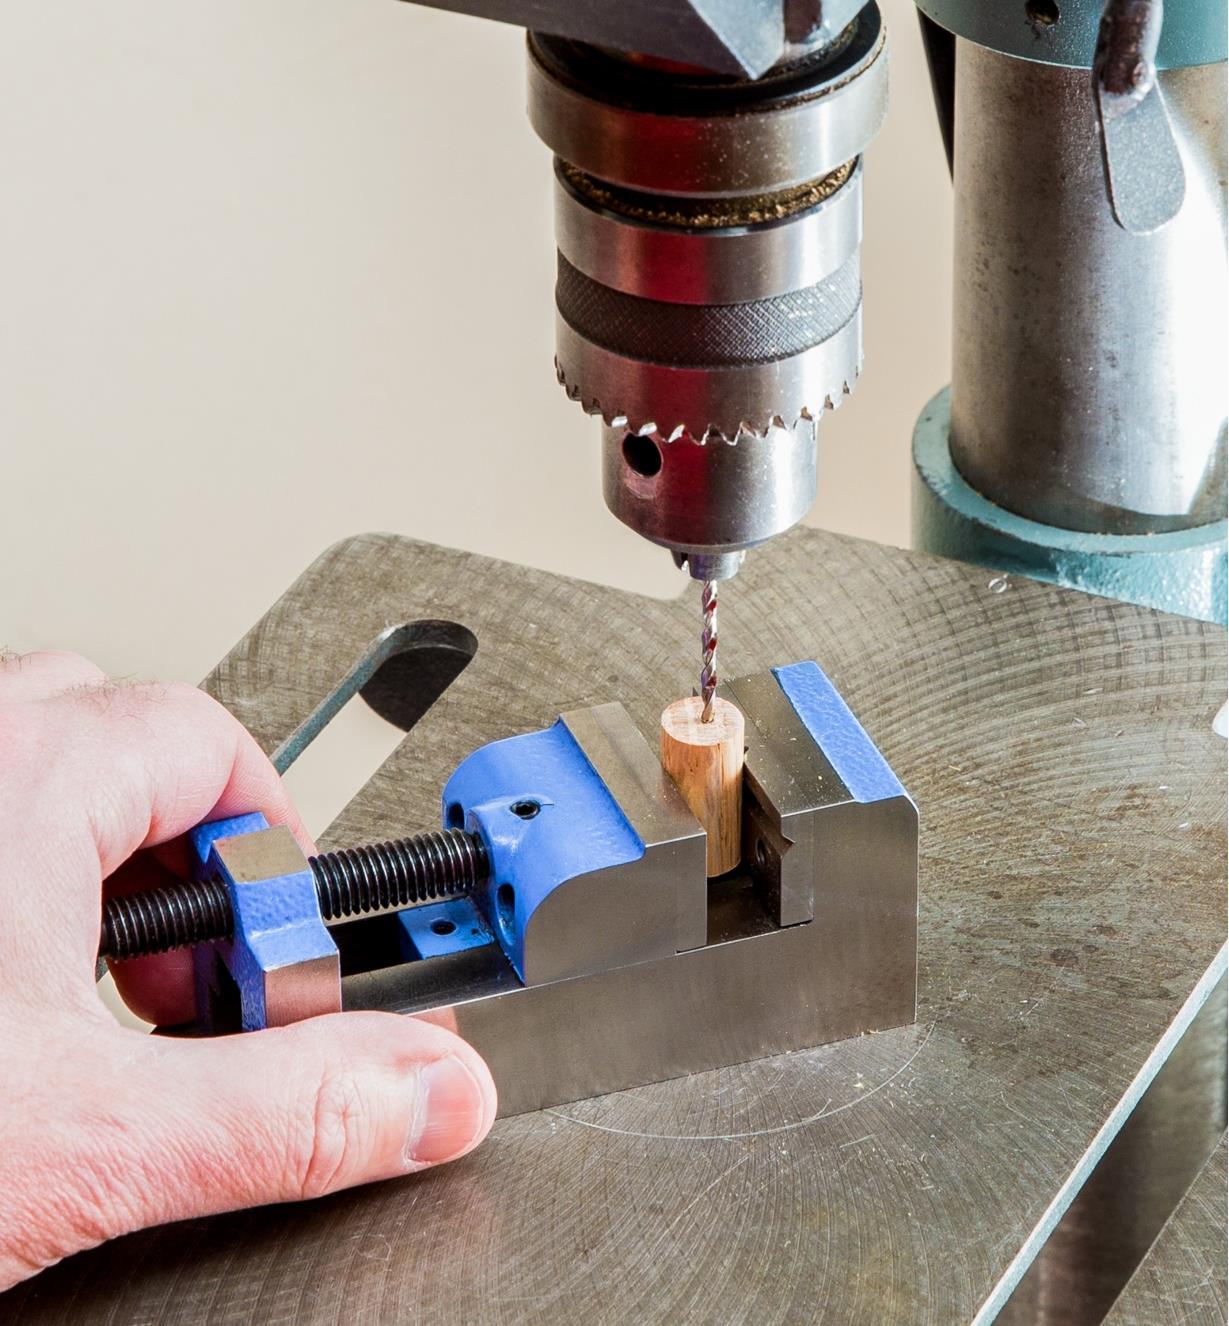 A drill press is used to drill a hole in a small piece of wood that is held in the toolmaker’s vise.